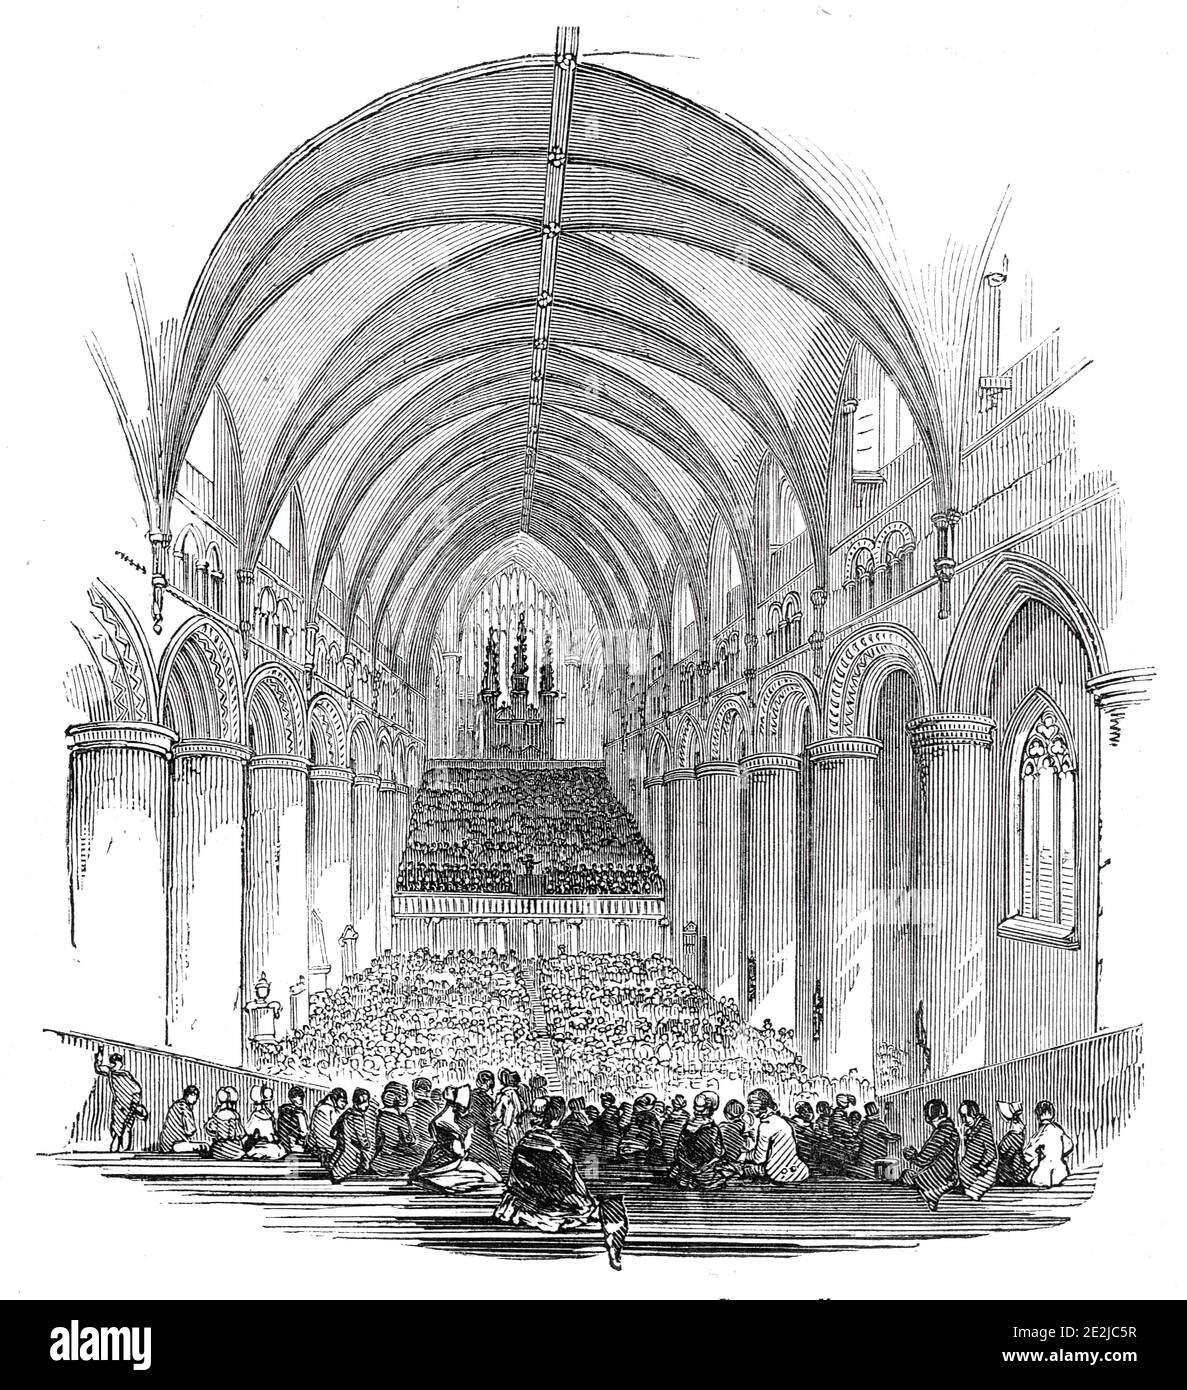 The Gloucester Musical Festival, 1844. '...the hundred and fifty-first annual meeting of the three choirs of Hereford, Gloucester, and Worcester, for the benefit of the Widows and Orphans' Fund of the clergy connected with the three dioceses was commenced in the antique Cathedral of Gloucester...The performance opened with full cathedral service. The whole of the spacious nave of the western part of this noble edifice was fitted up with great care and neatness. Immediately in front of the organ were fixed the seats for the orchestral performers, three hundred in number...'. From &quot;Illustra Stock Photo